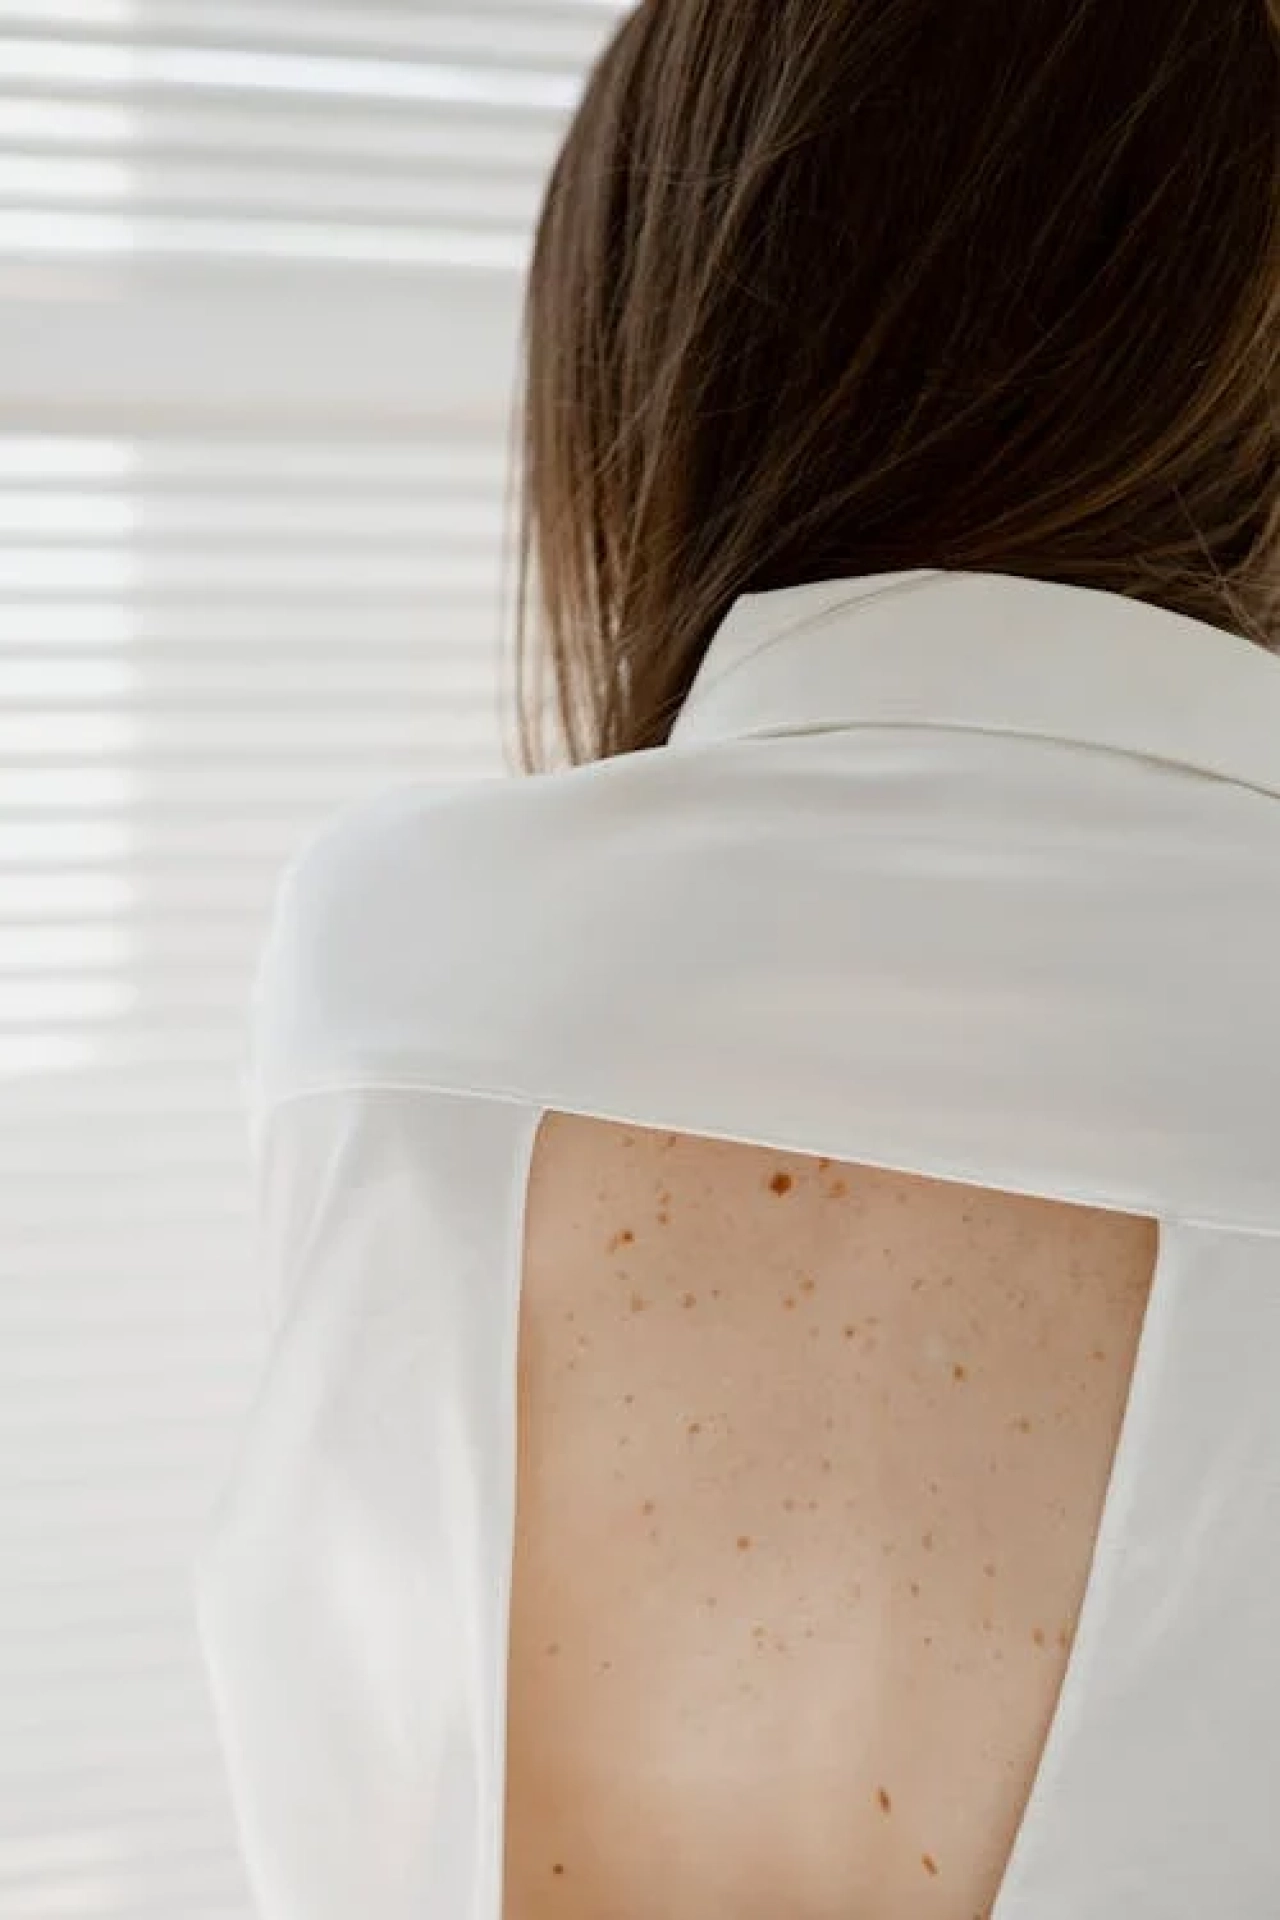 woman with moles and freckles on her back.